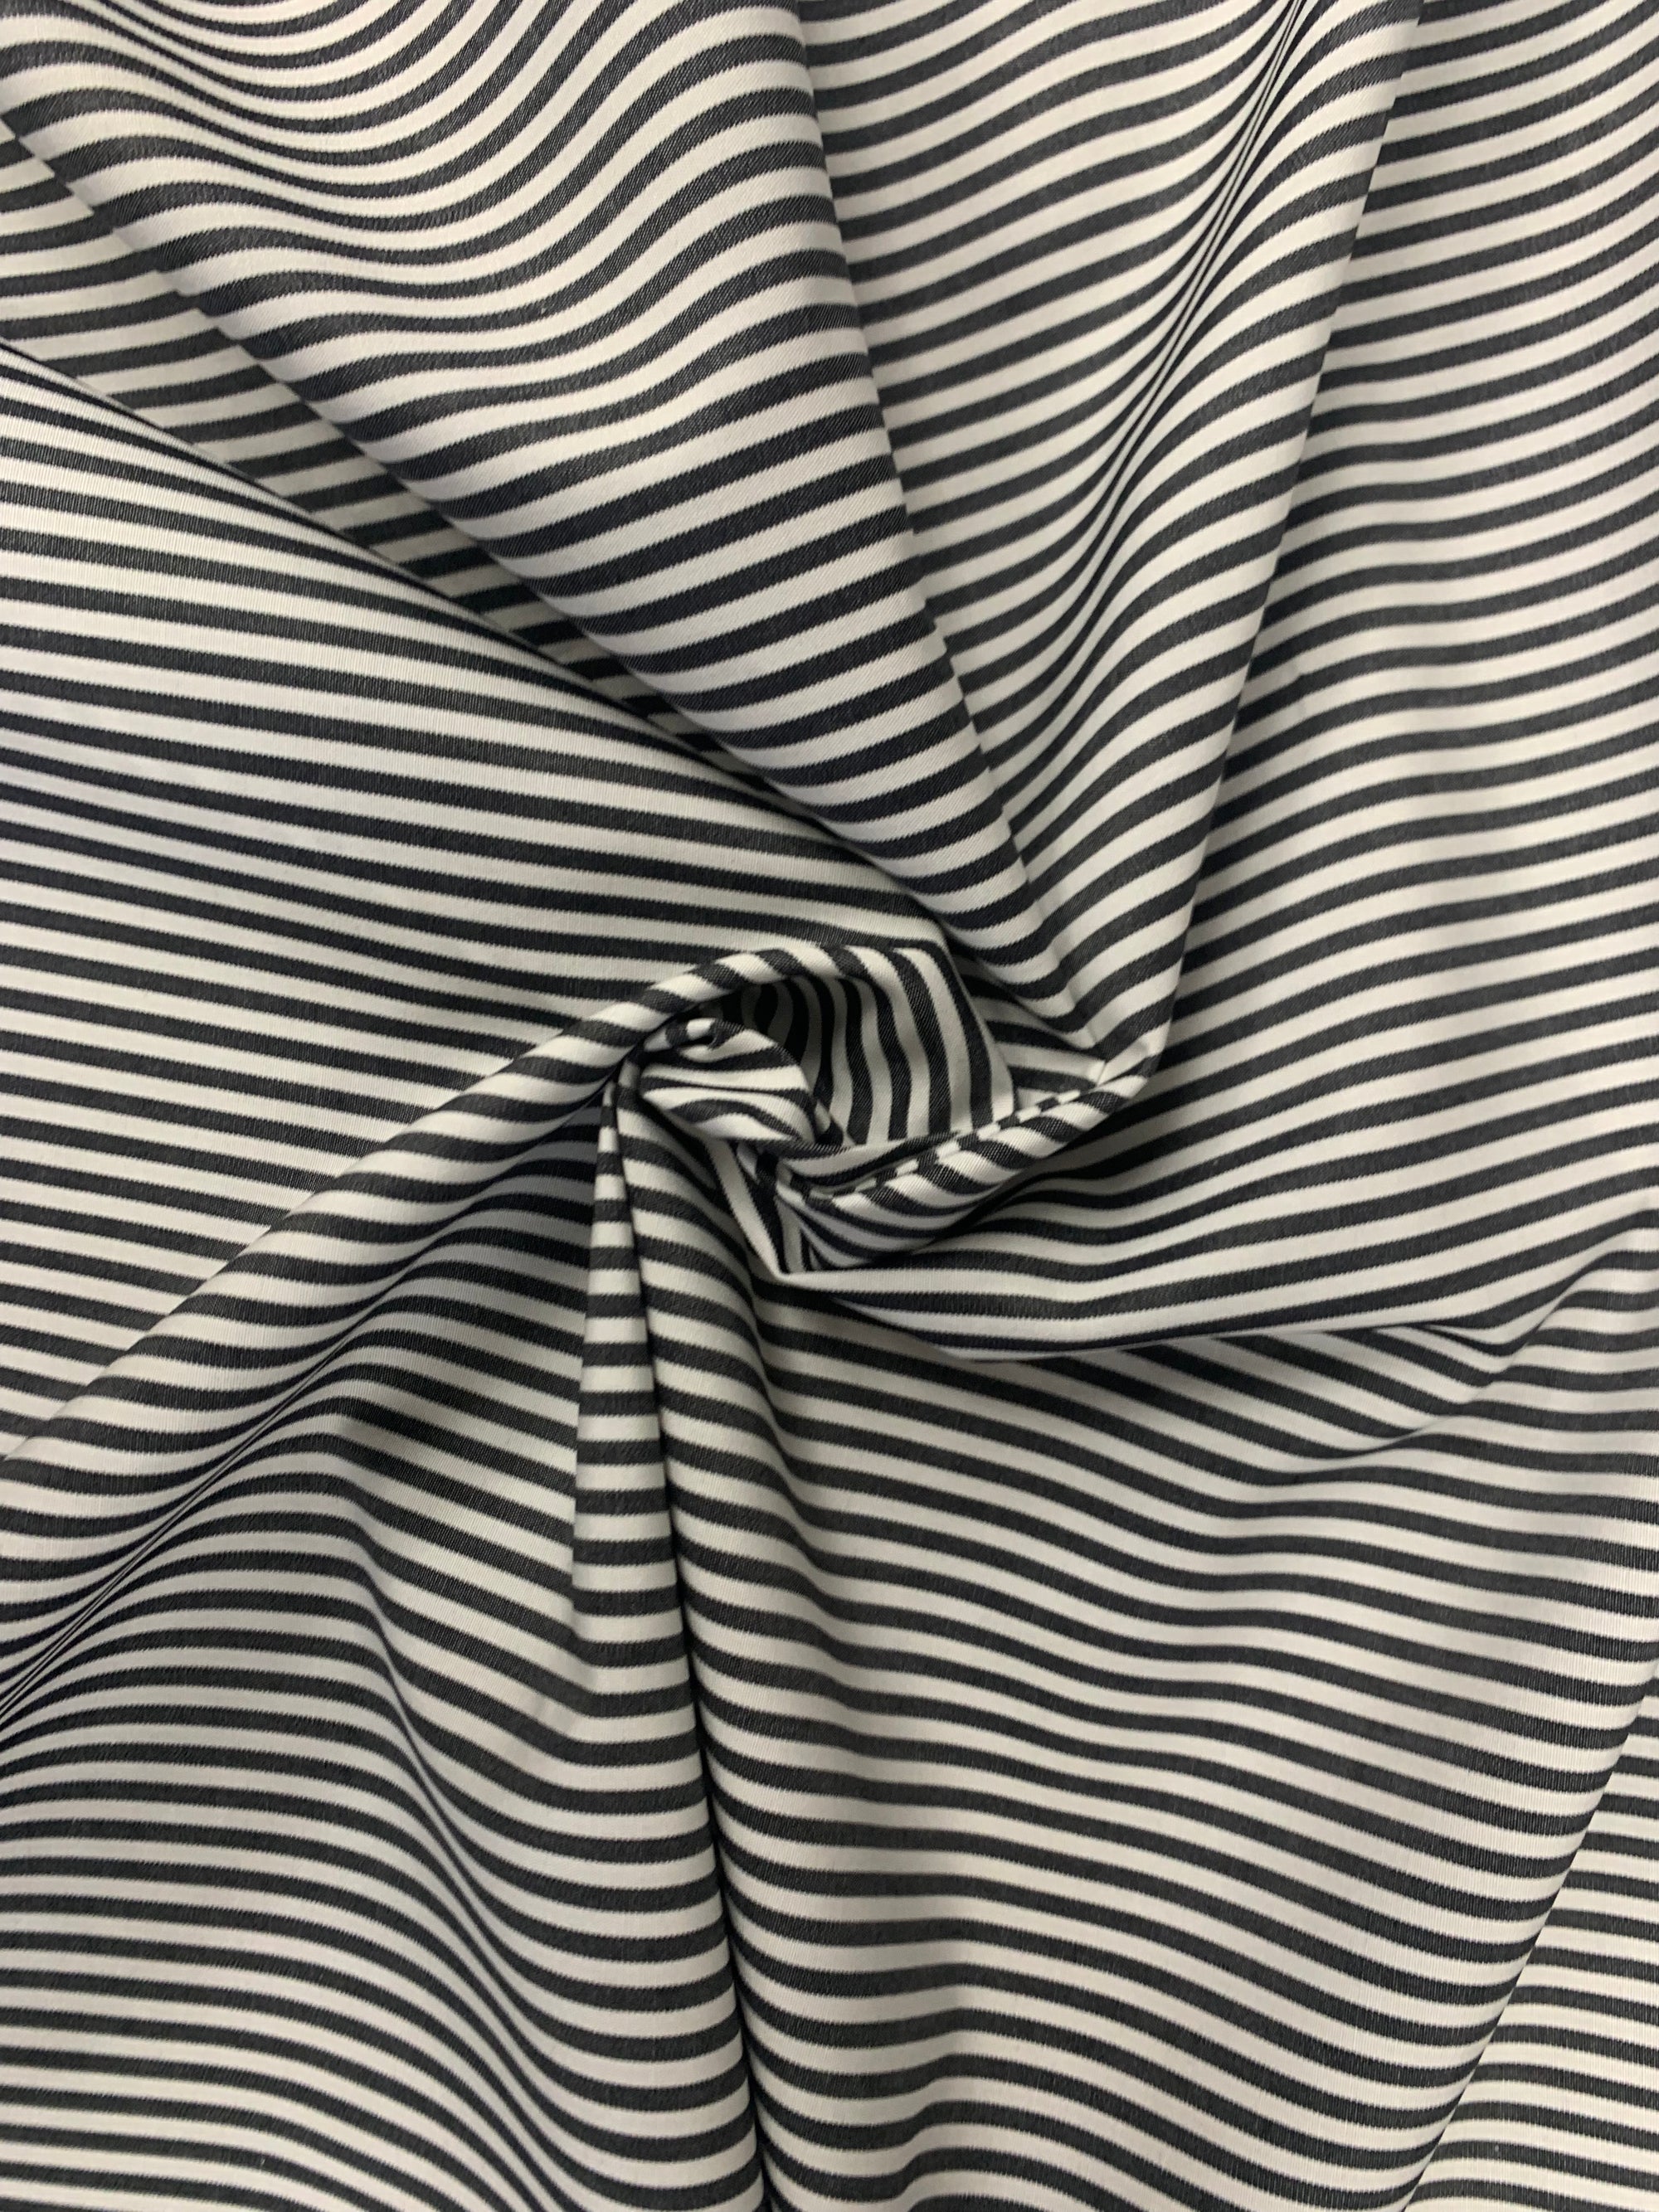 Fabric in a cotton shirting in black and white stripe in a spiral.